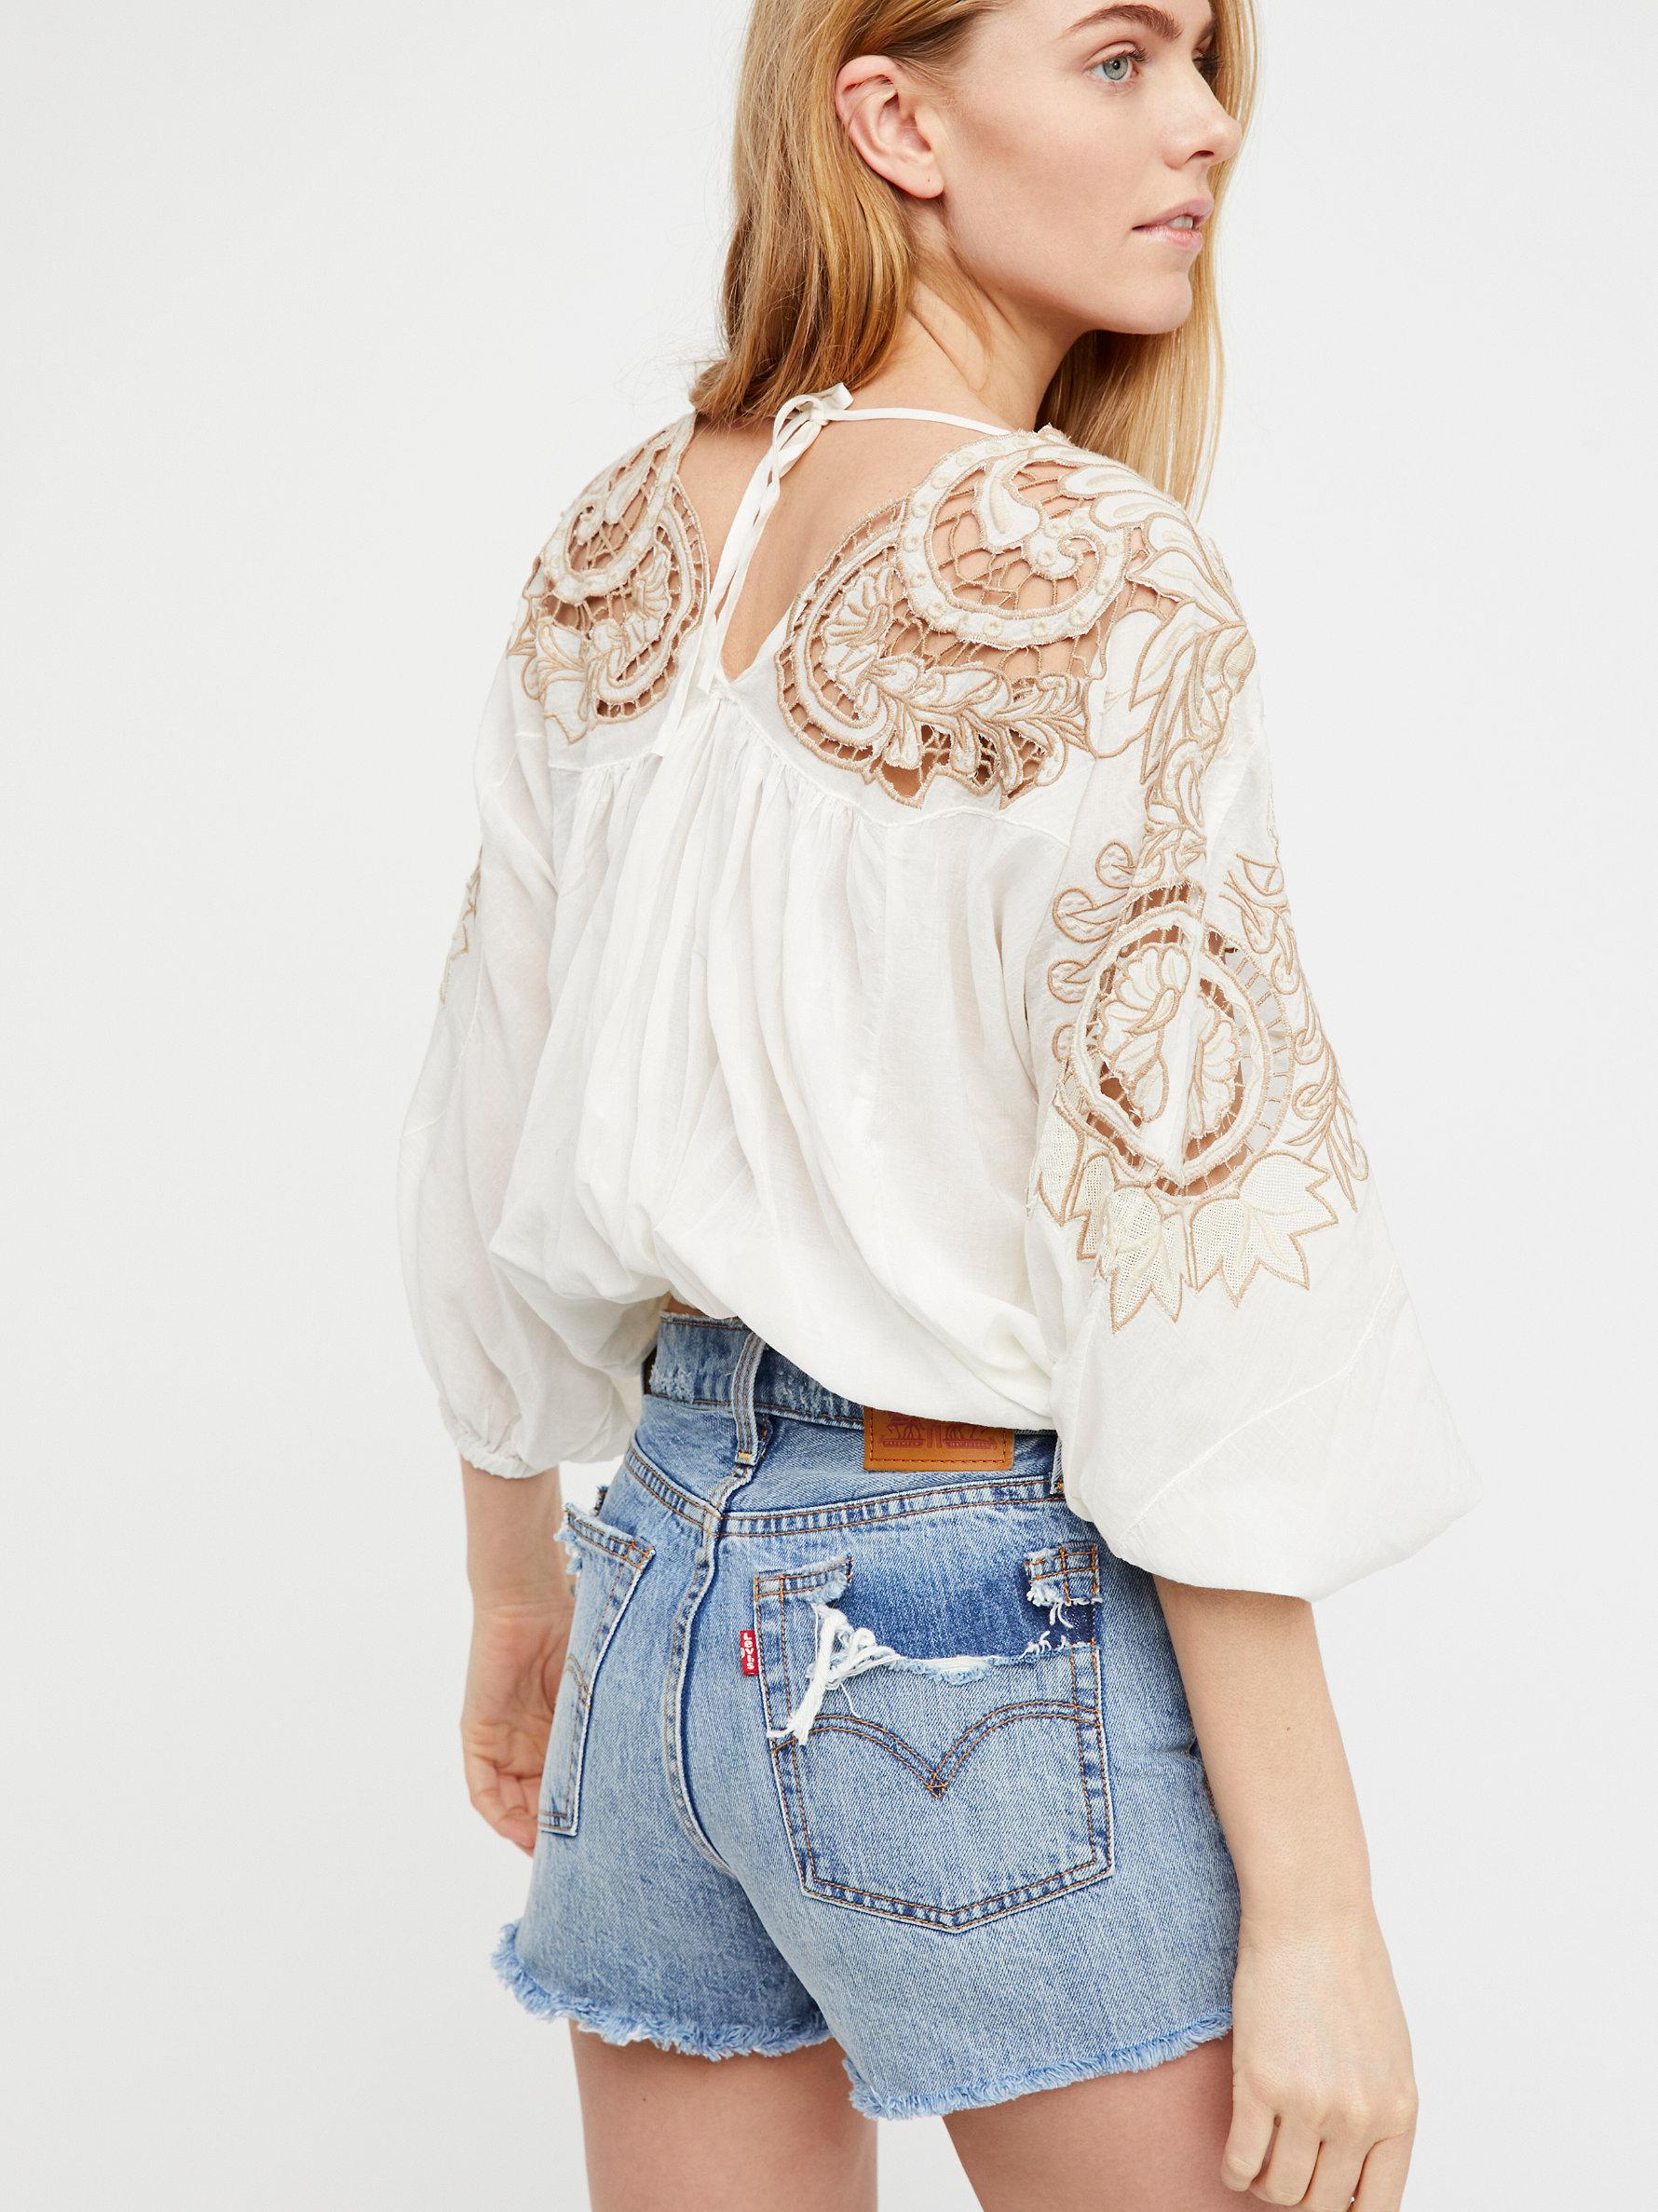 Free People Cotton Cutwork Dolman Blouse in Ivory (White) - Lyst